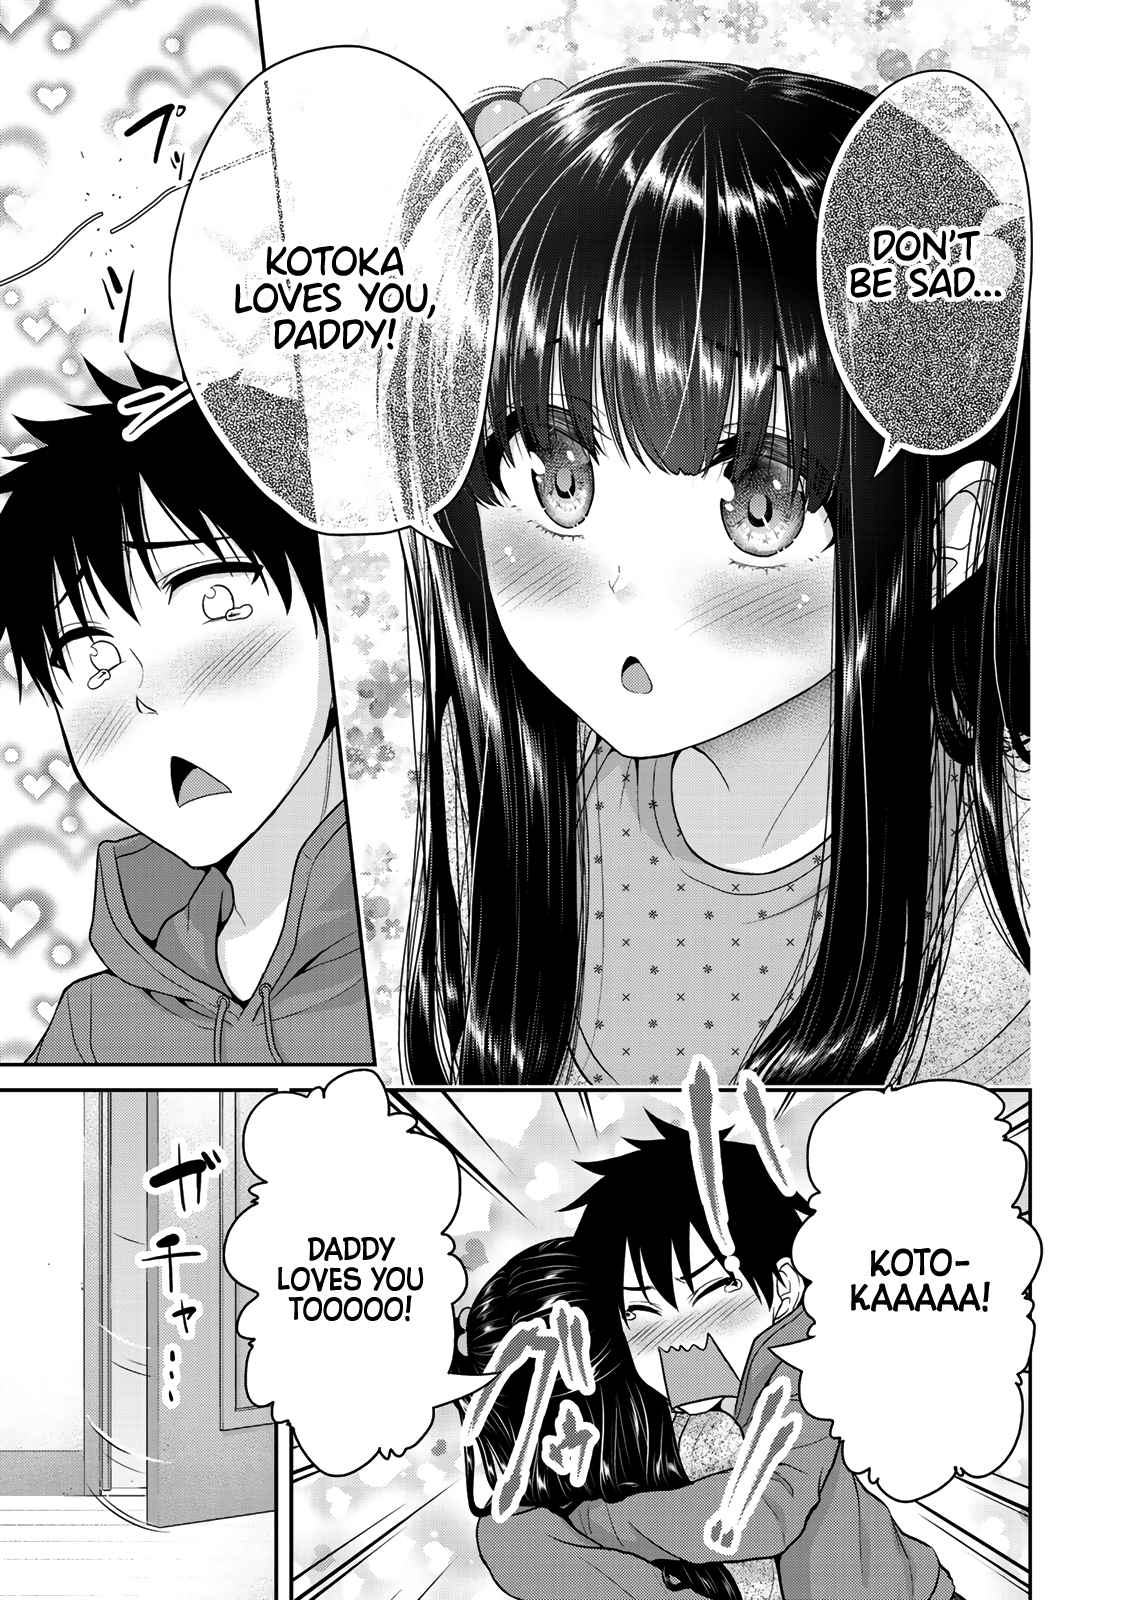 Fechippuru ~Our Innocent Love~ Vol. 3 Ch. 27 Some Kind of Cursed Roleplay